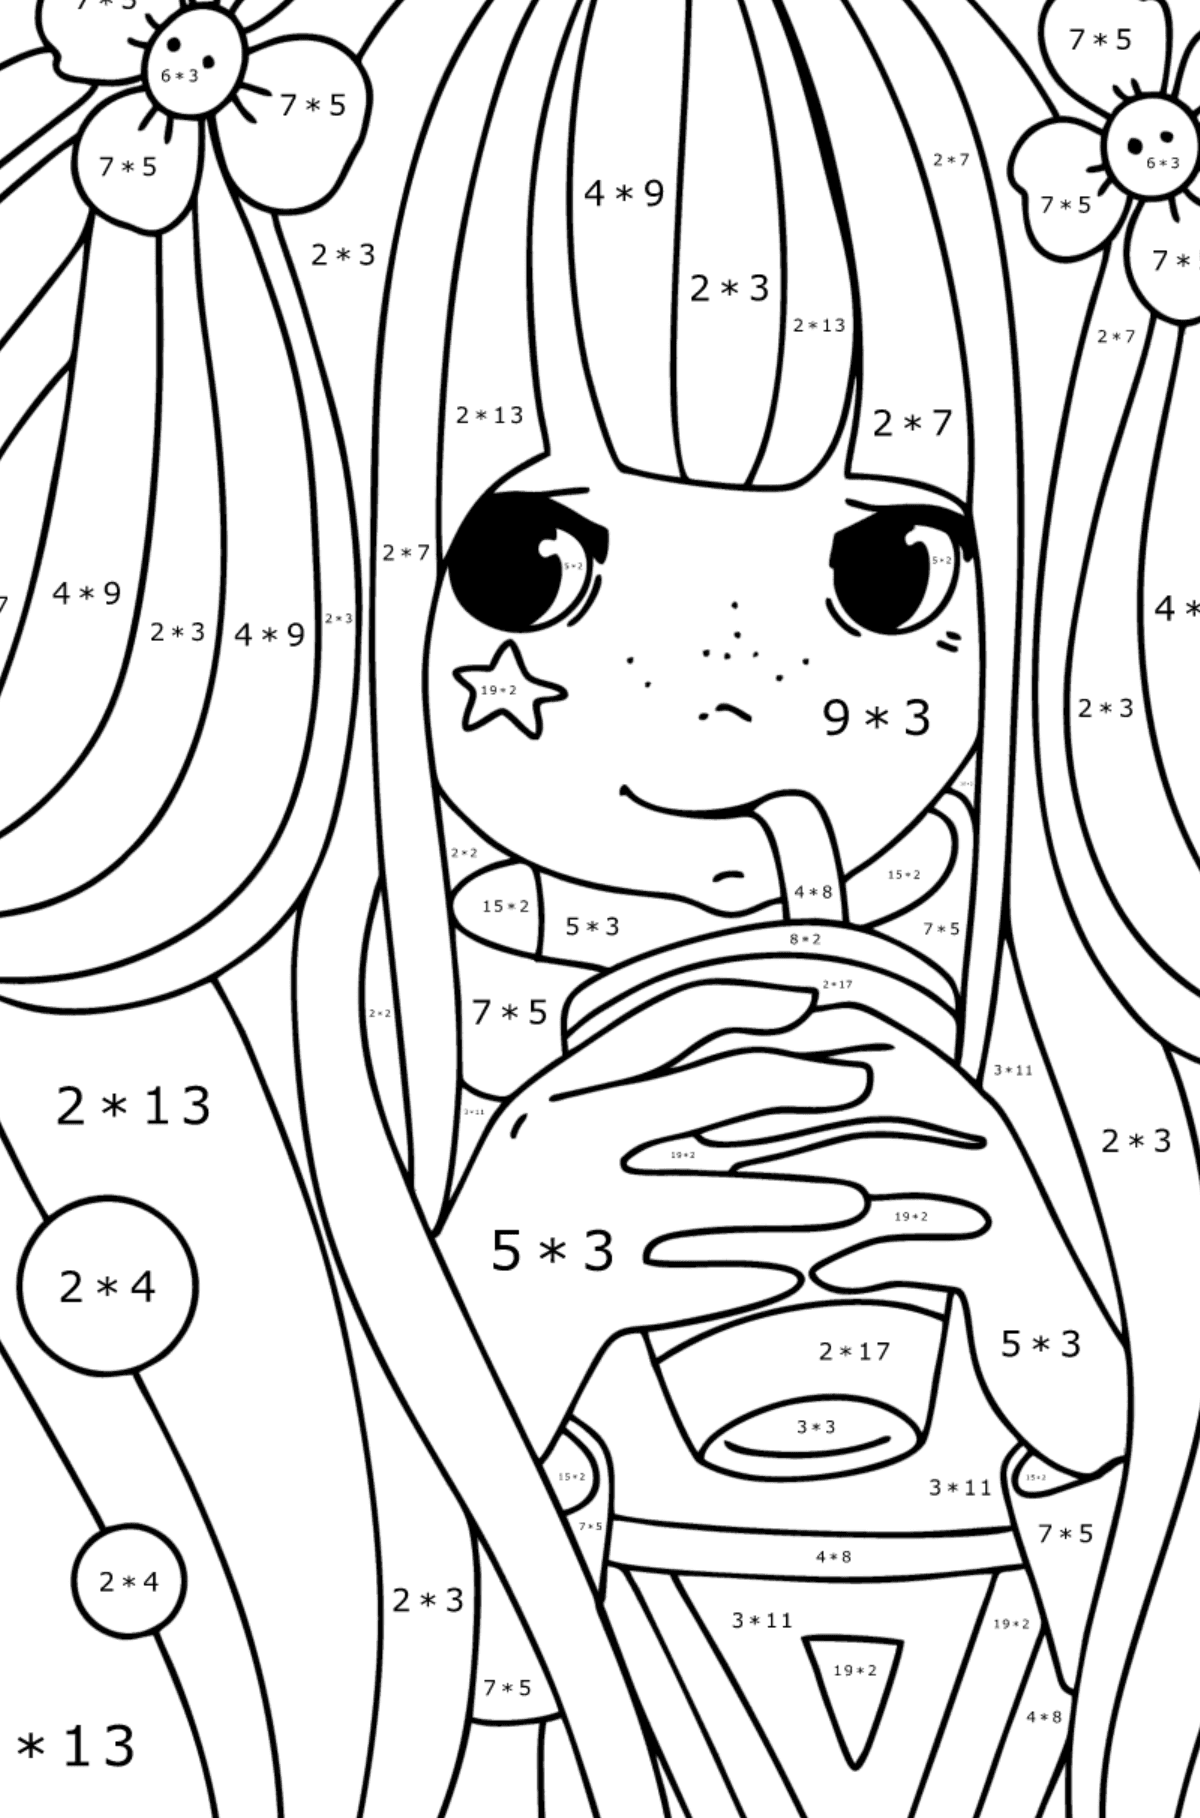 Girl anime fashionista coloring page - Math Coloring - Multiplication for Kids